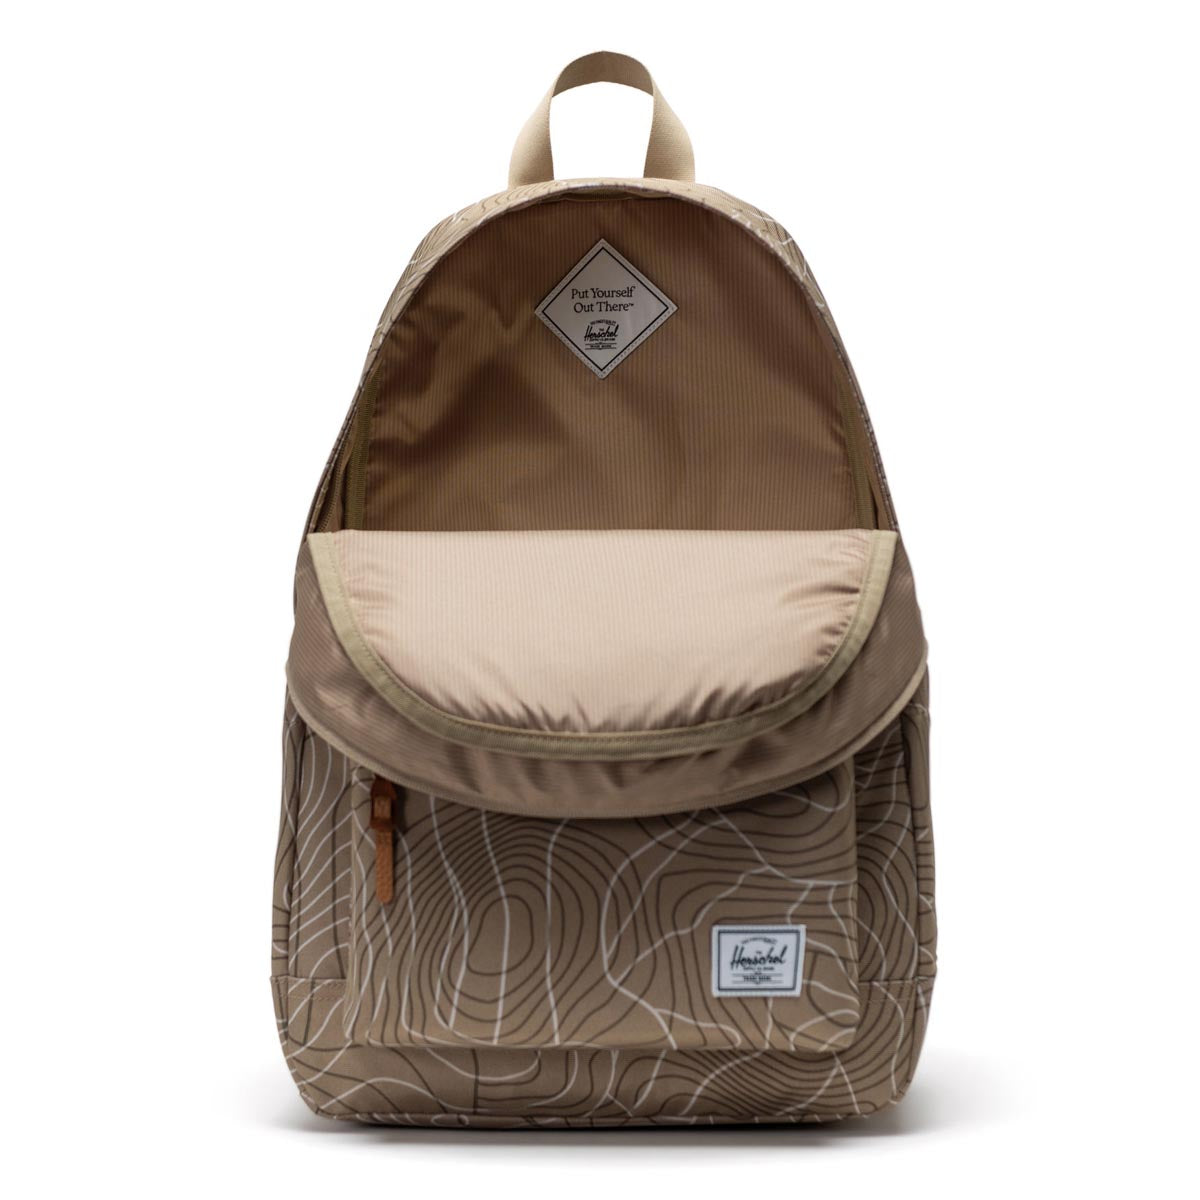 Herschel Supply Heritage Backpack - Twill Topography image 4